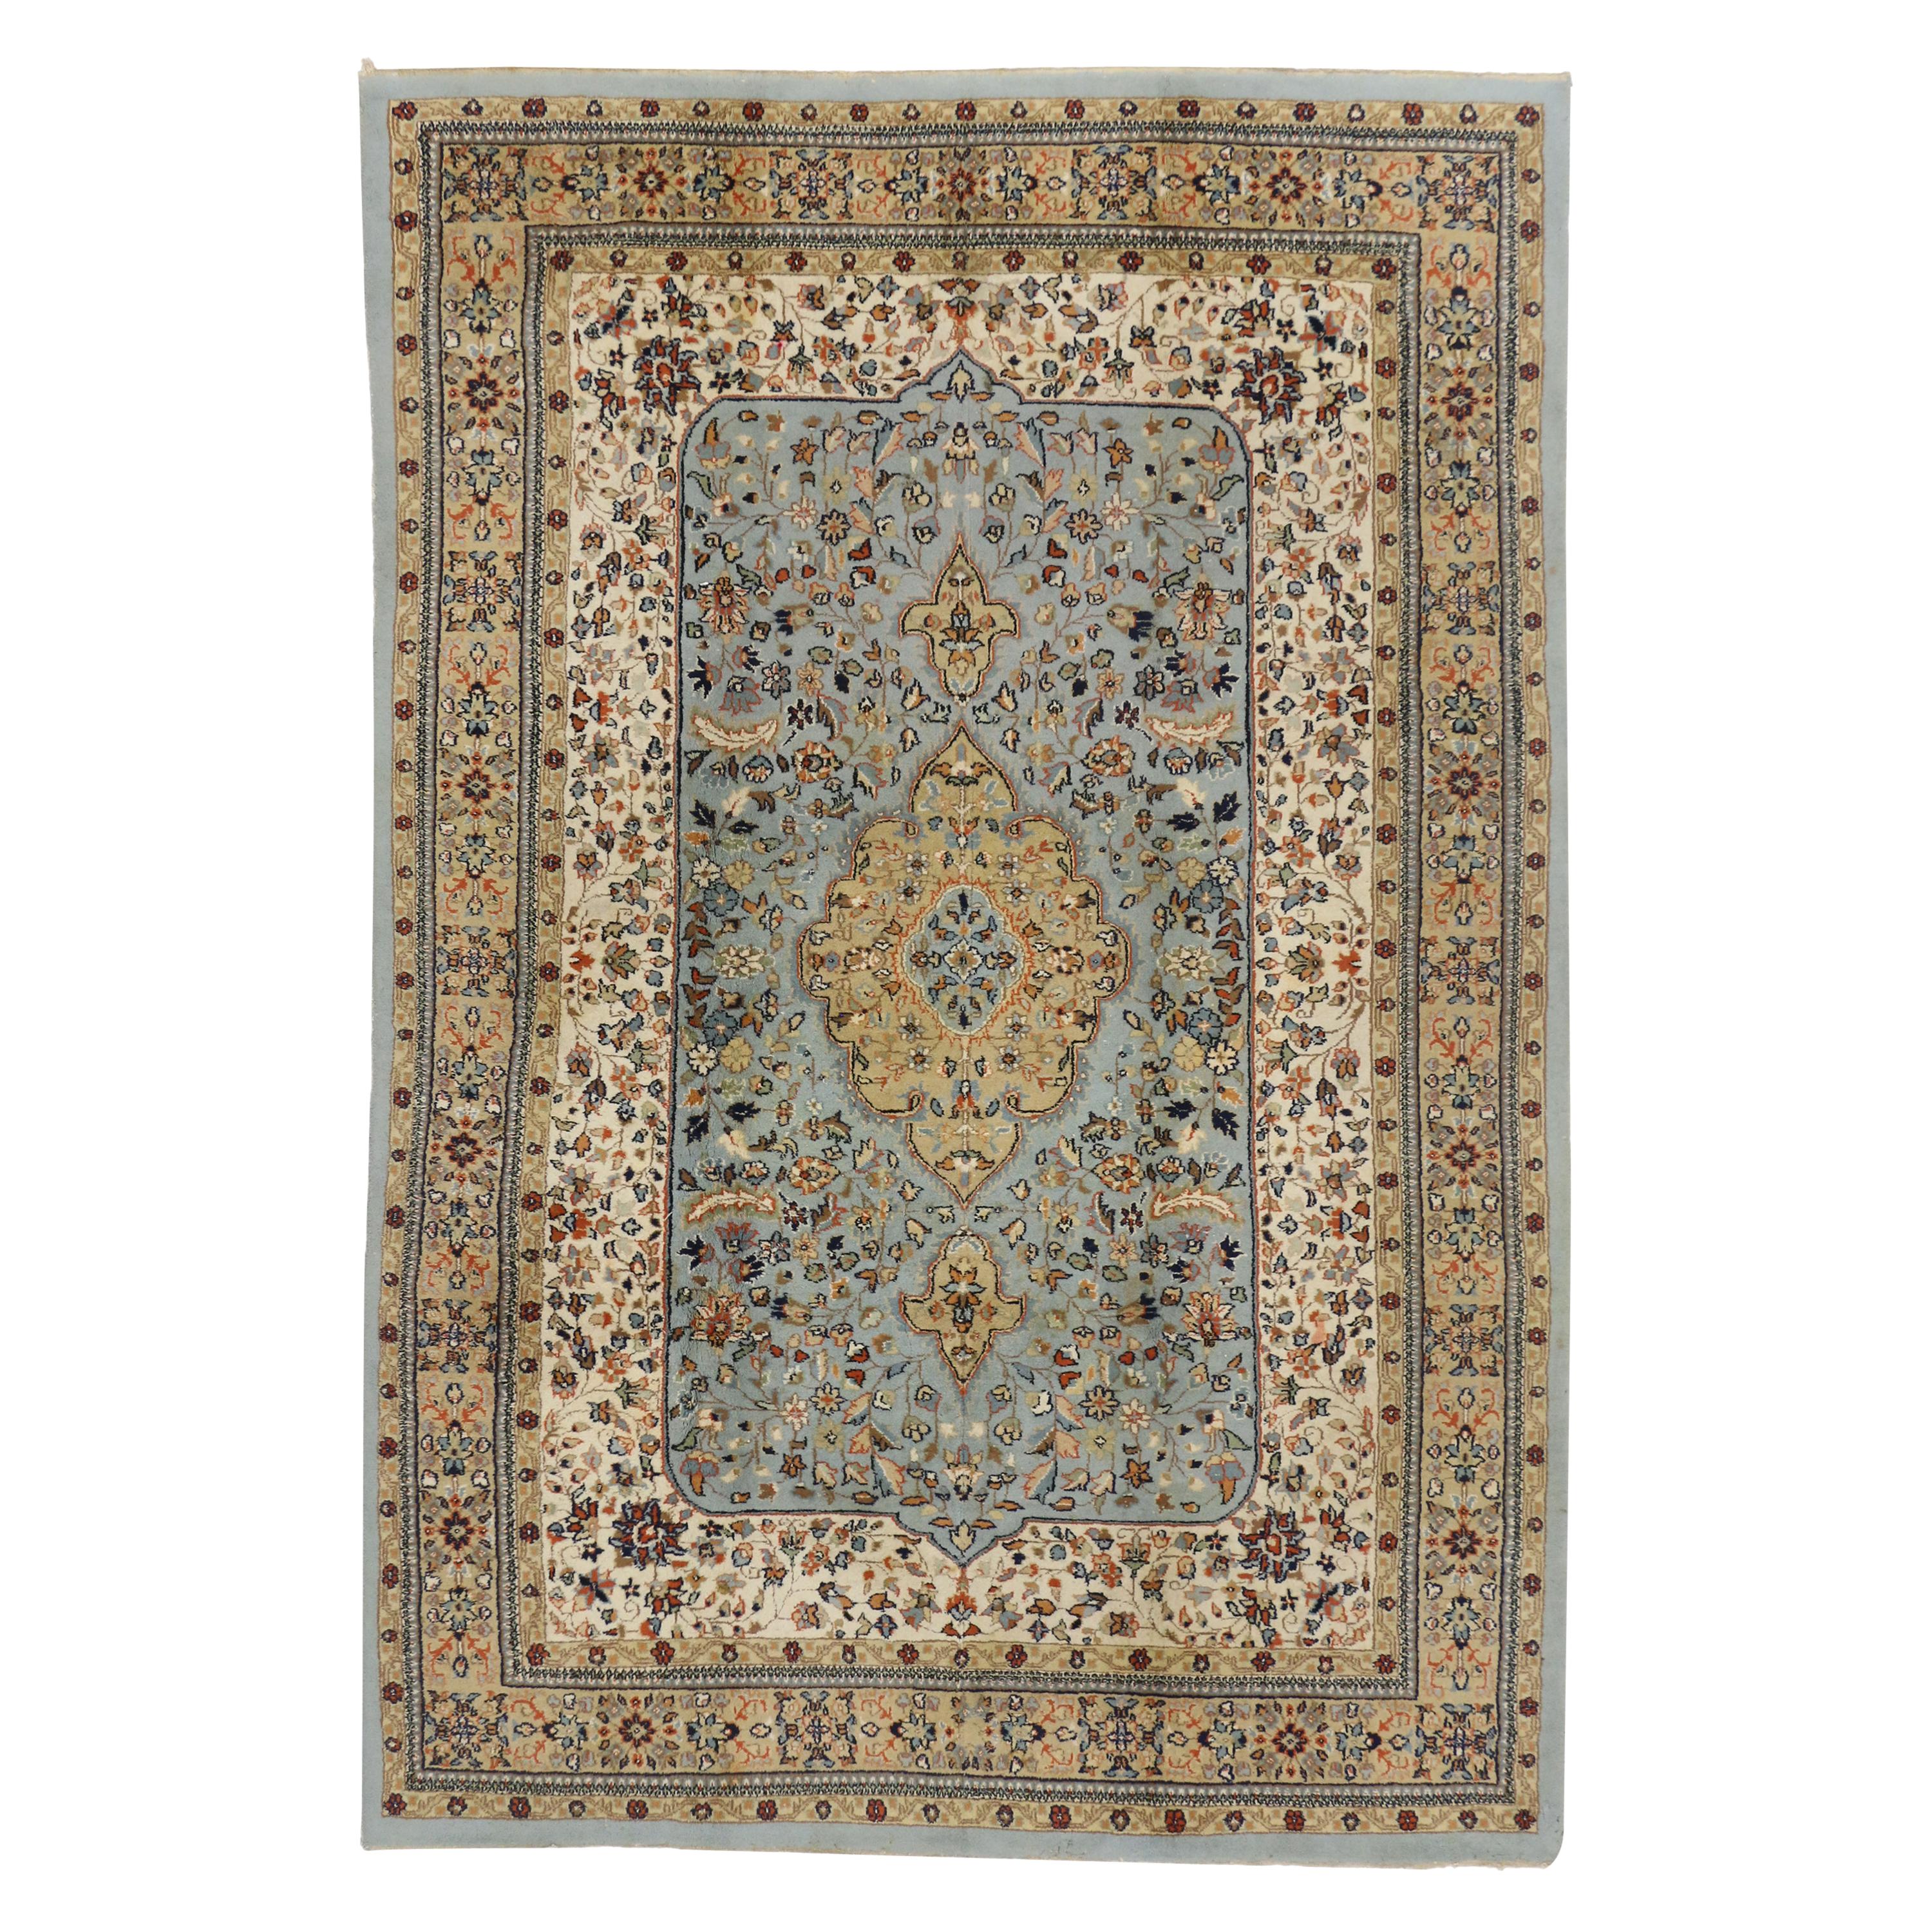 French Country Style Vintage Indo-Persian Design Area Rug